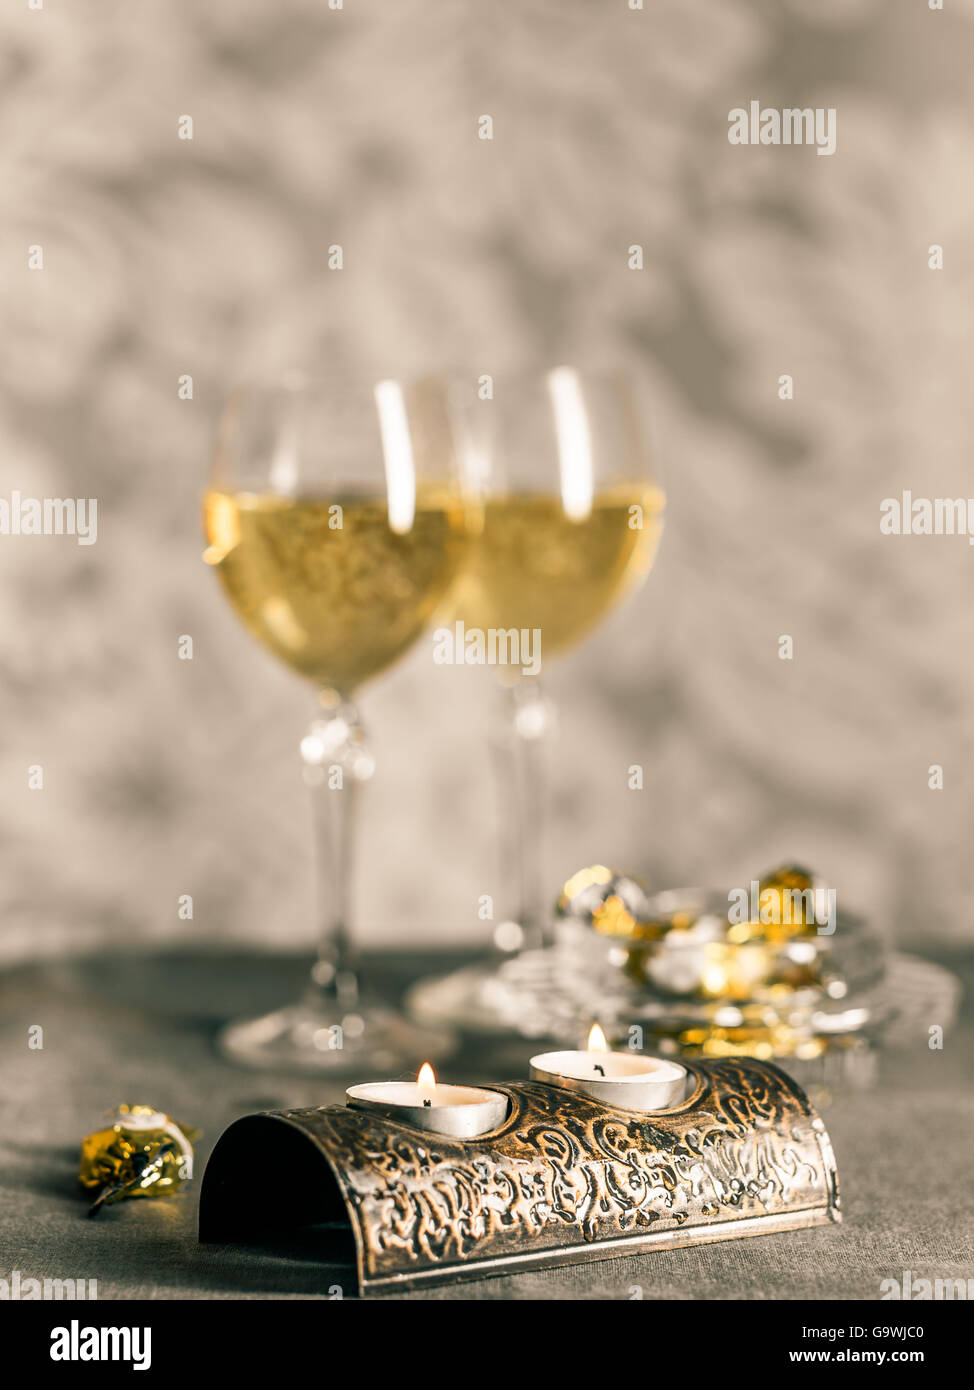 crystal glasses with wine, chocolates and candles Stock Photo